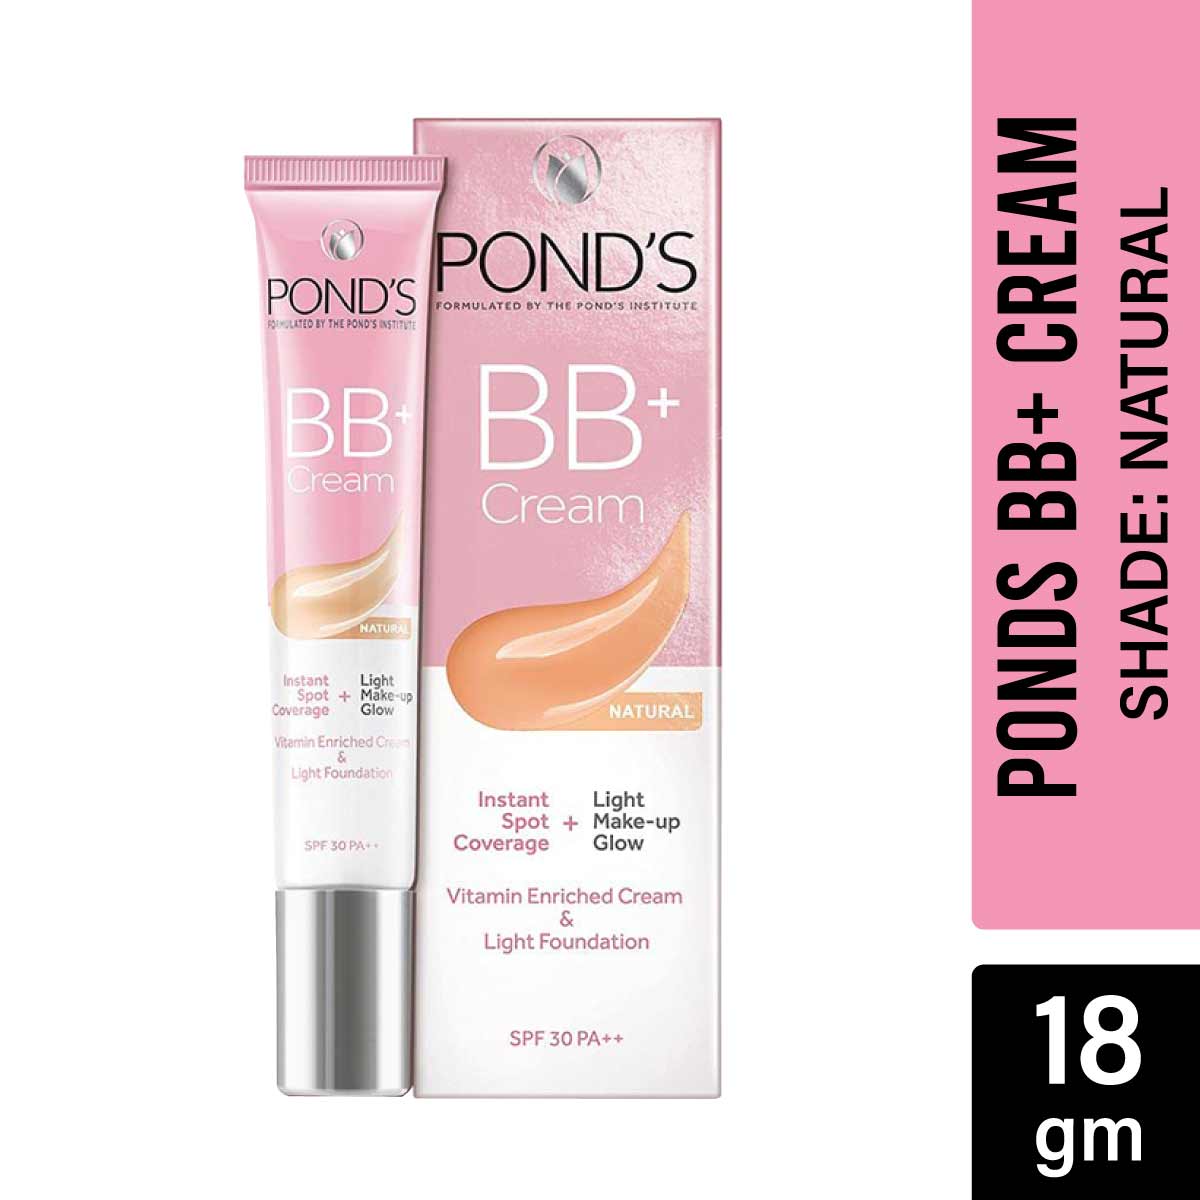 Ponds BB+ Cream Instant Spot Coverage, Shade - Natural 18gm